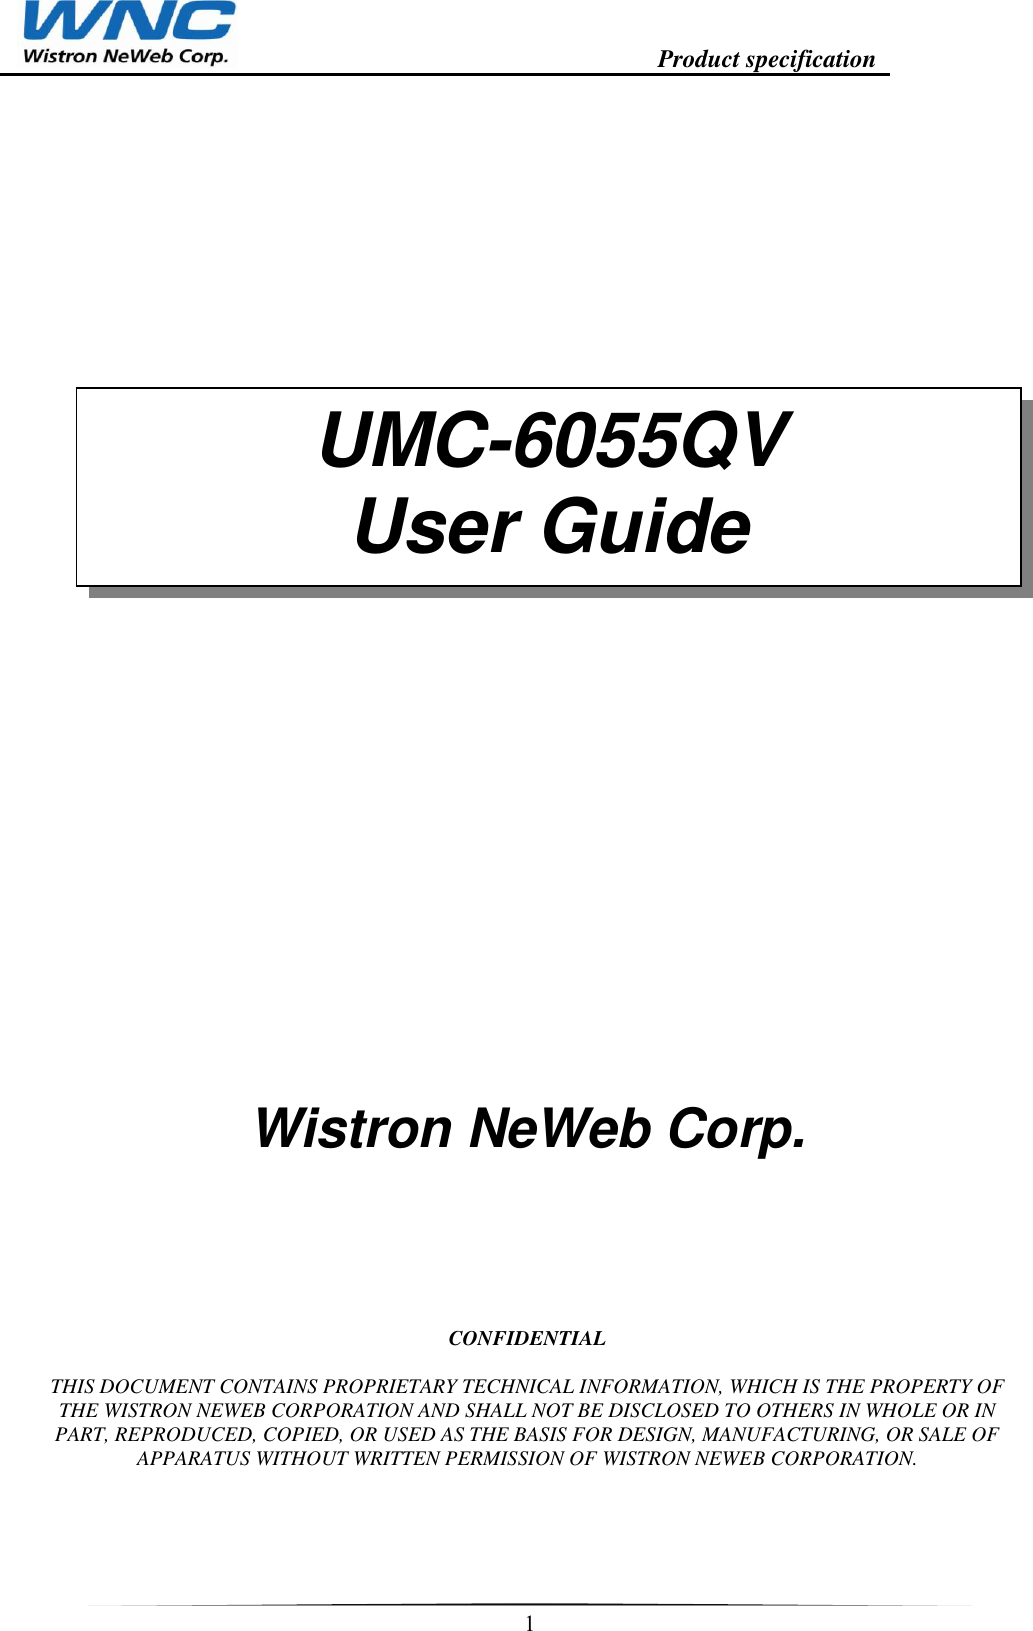                                                                    Product specification    1    Wistron NeWeb Corp.          CONFIDENTIAL  THIS DOCUMENT CONTAINS PROPRIETARY TECHNICAL INFORMATION, WHICH IS THE PROPERTY OF THE WISTRON NEWEB CORPORATION AND SHALL NOT BE DISCLOSED TO OTHERS IN WHOLE OR IN PART, REPRODUCED, COPIED, OR USED AS THE BASIS FOR DESIGN, MANUFACTURING, OR SALE OF APPARATUS WITHOUT WRITTEN PERMISSION OF WISTRON NEWEB CORPORATION.  UMC-6055QV User Guide 